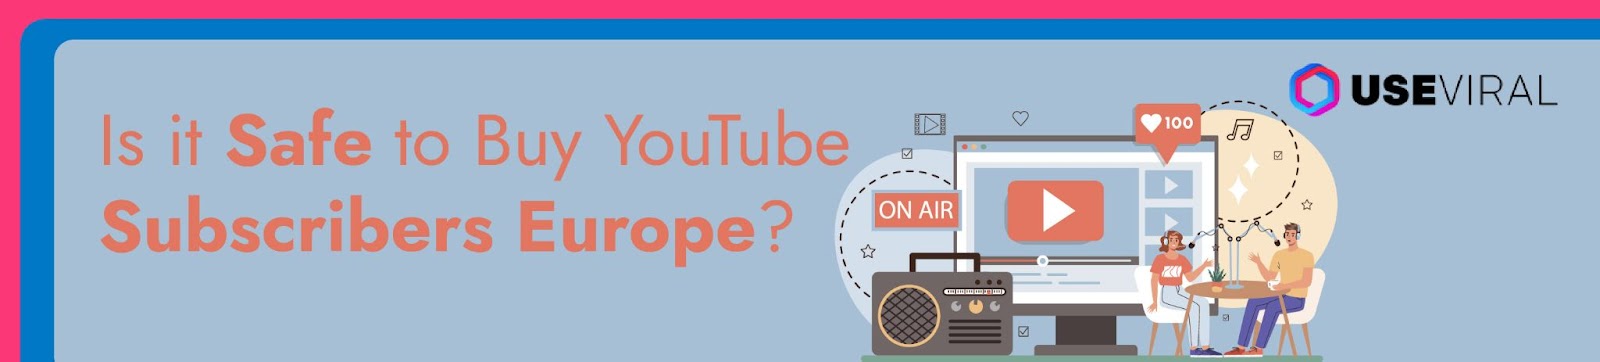 Is it Safe to Buy YouTube Subscribers Europe?